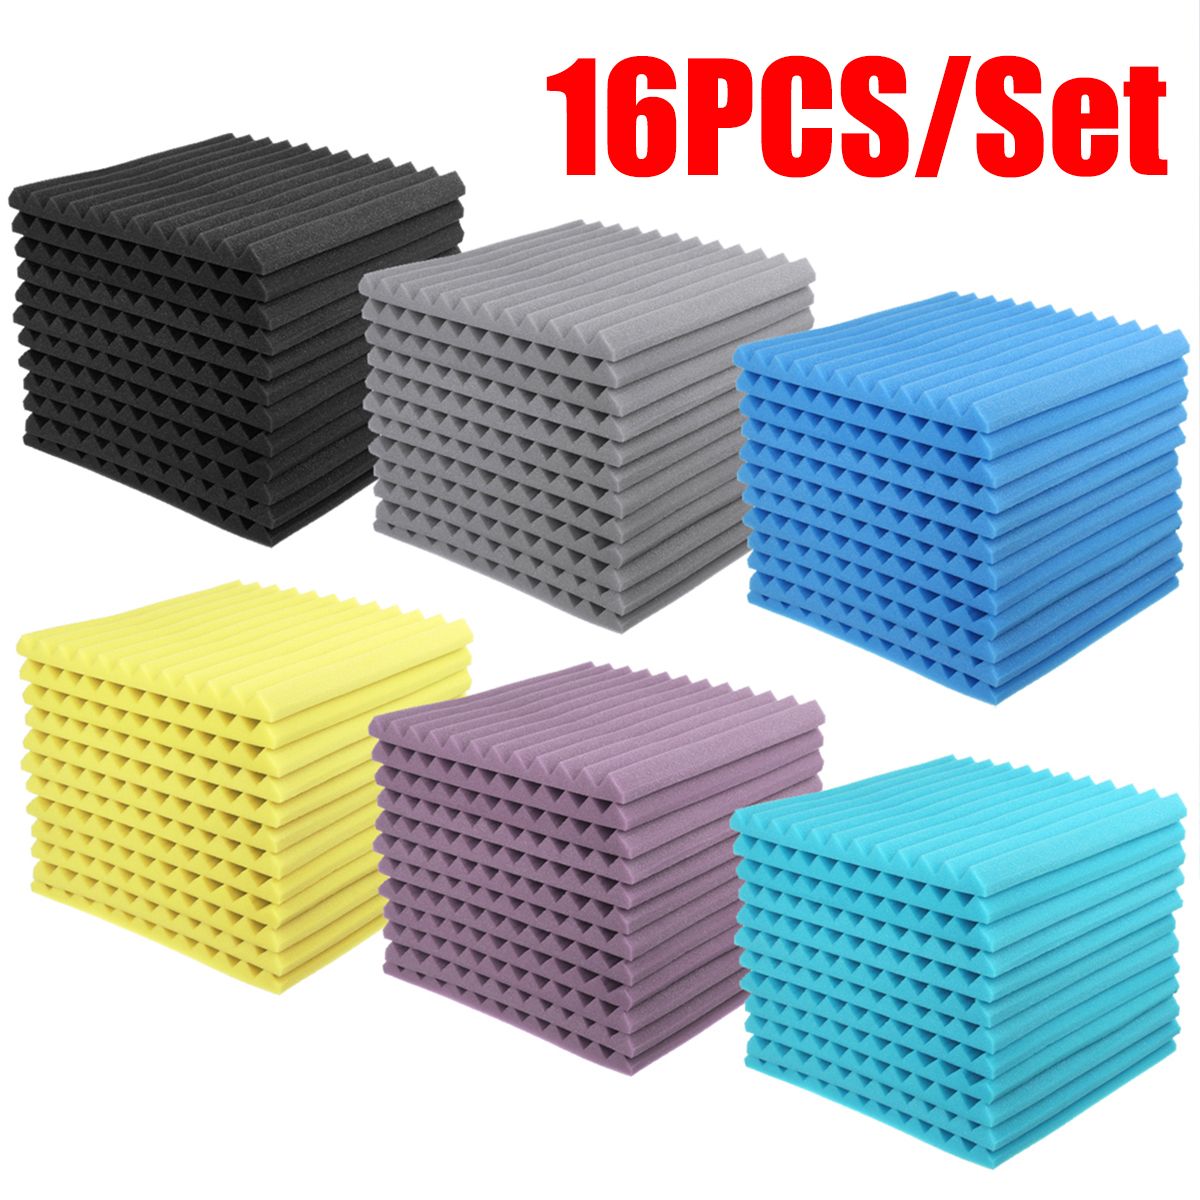 16-Pcs-Soundproofing-Wedges-Acoustic-Panels-Tiles-Insulation-Closed-Cell-Foams-1737781